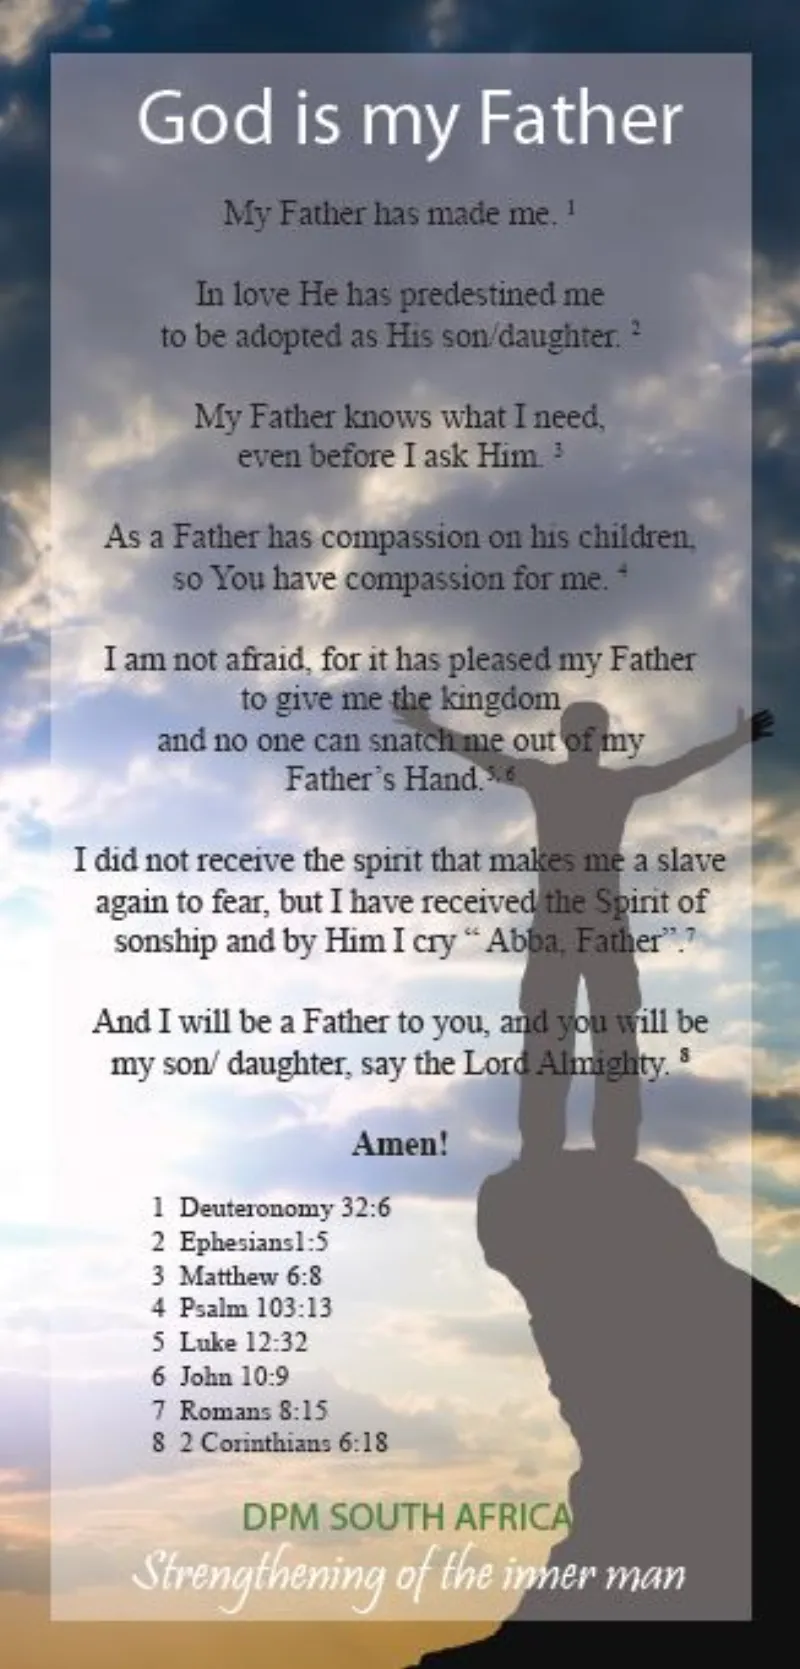 Proclamation Card - God is my Father